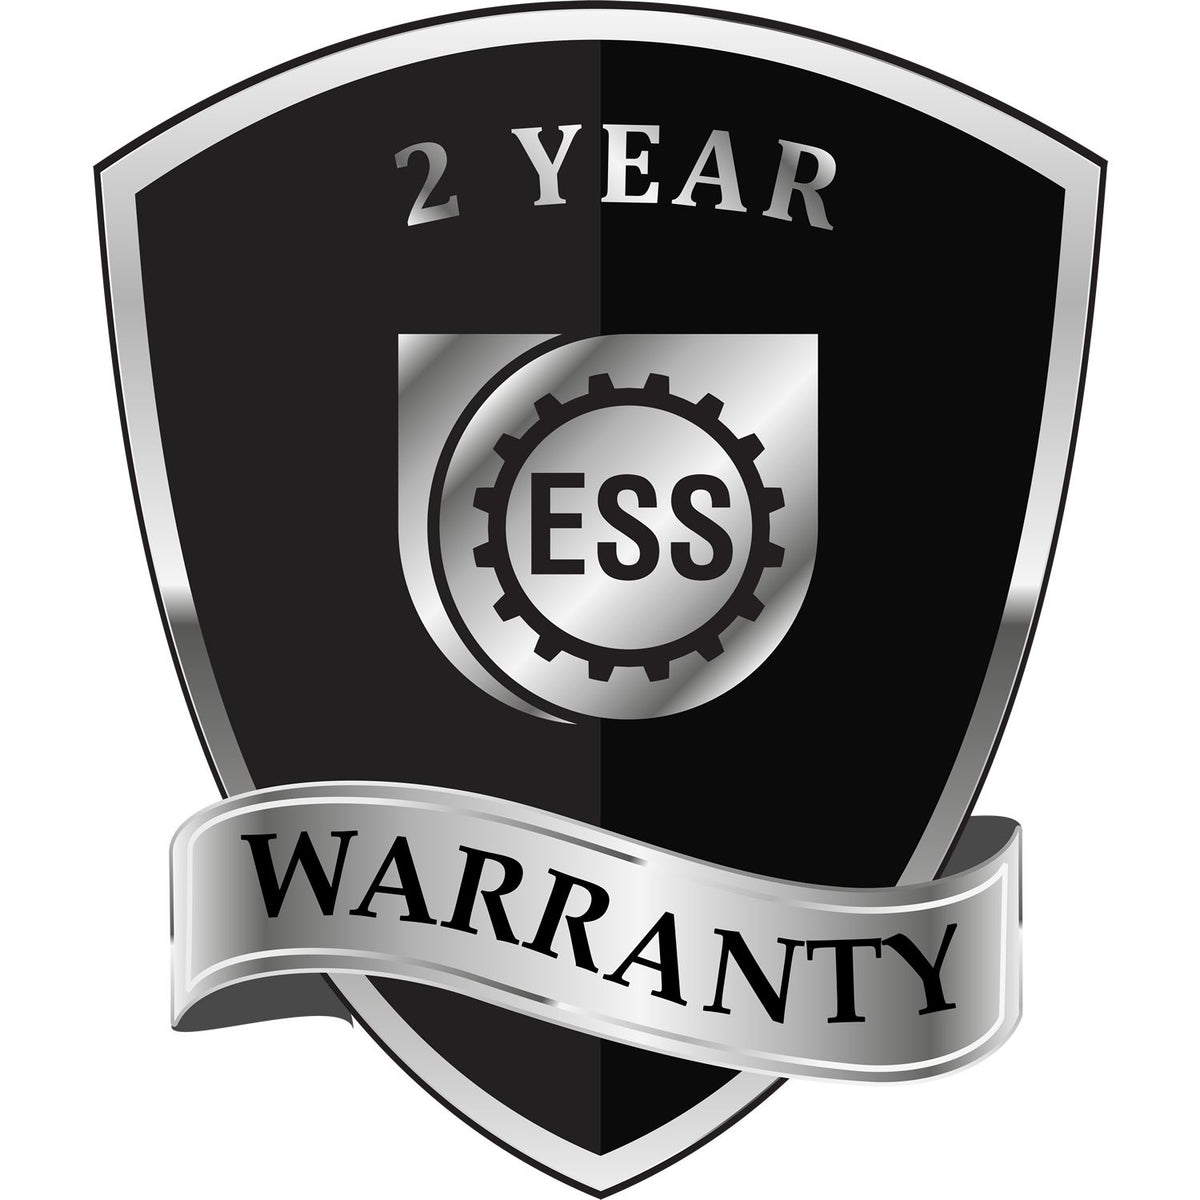 A badge or emblem showing a warranty icon for the Long Reach Minnesota Land Surveyor Seal